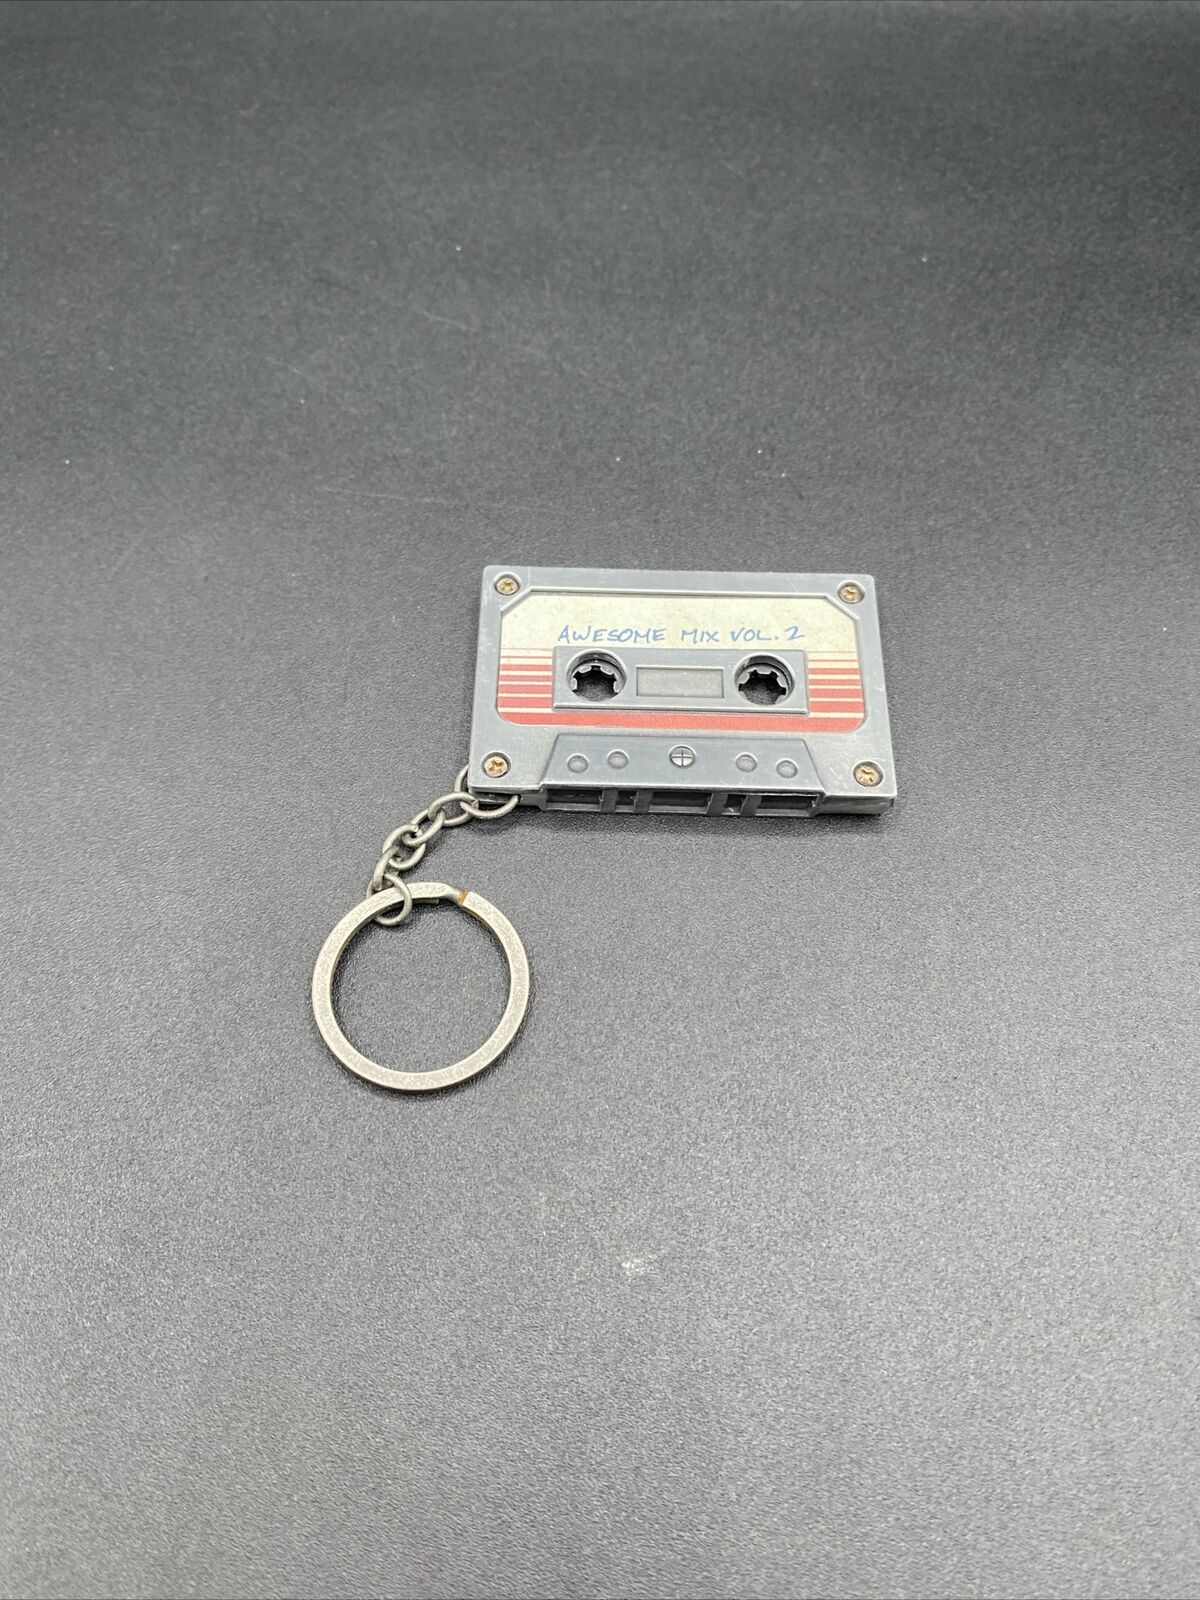 Vintage Awesome Mix Vol 2 Tape Cassette Key Chain